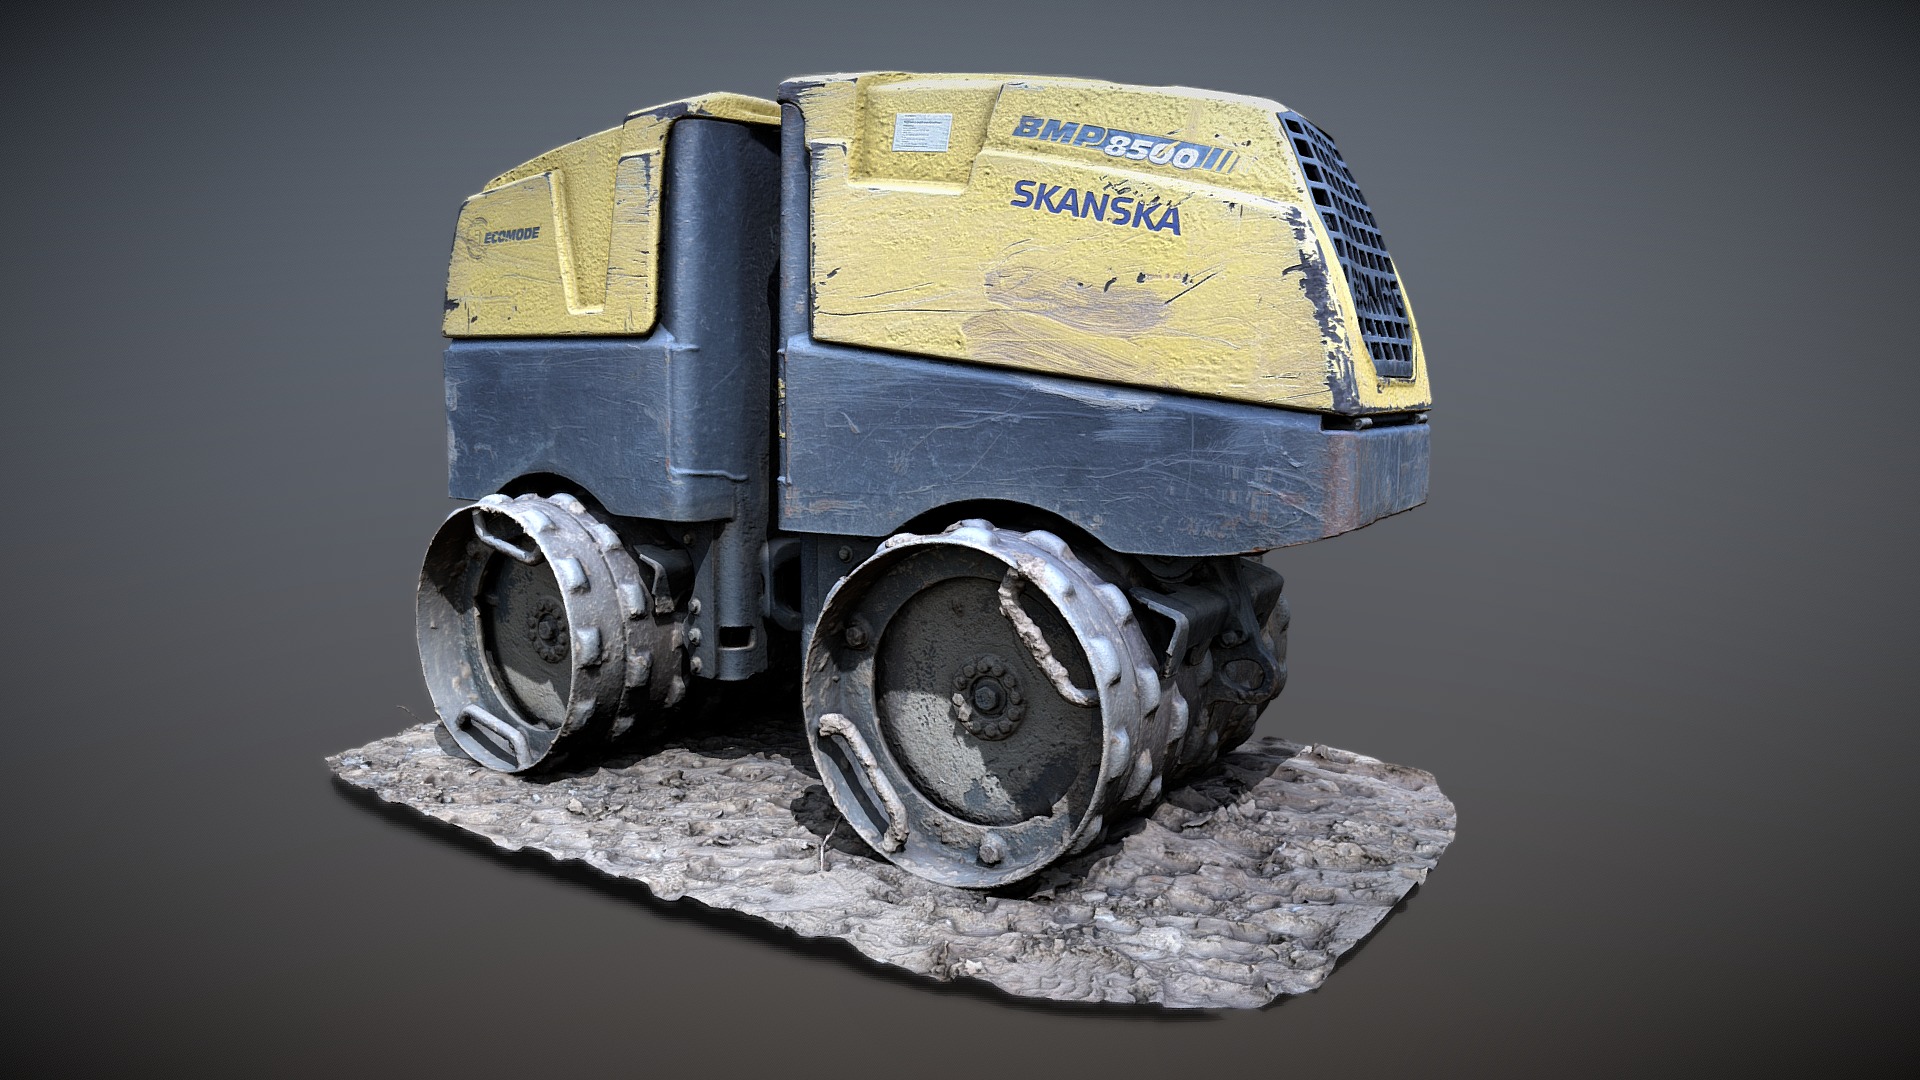 3D model Bomag compactor BMP 8500 - This is a 3D model of the Bomag compactor BMP 8500. The 3D model is about a metal object with a metal frame.